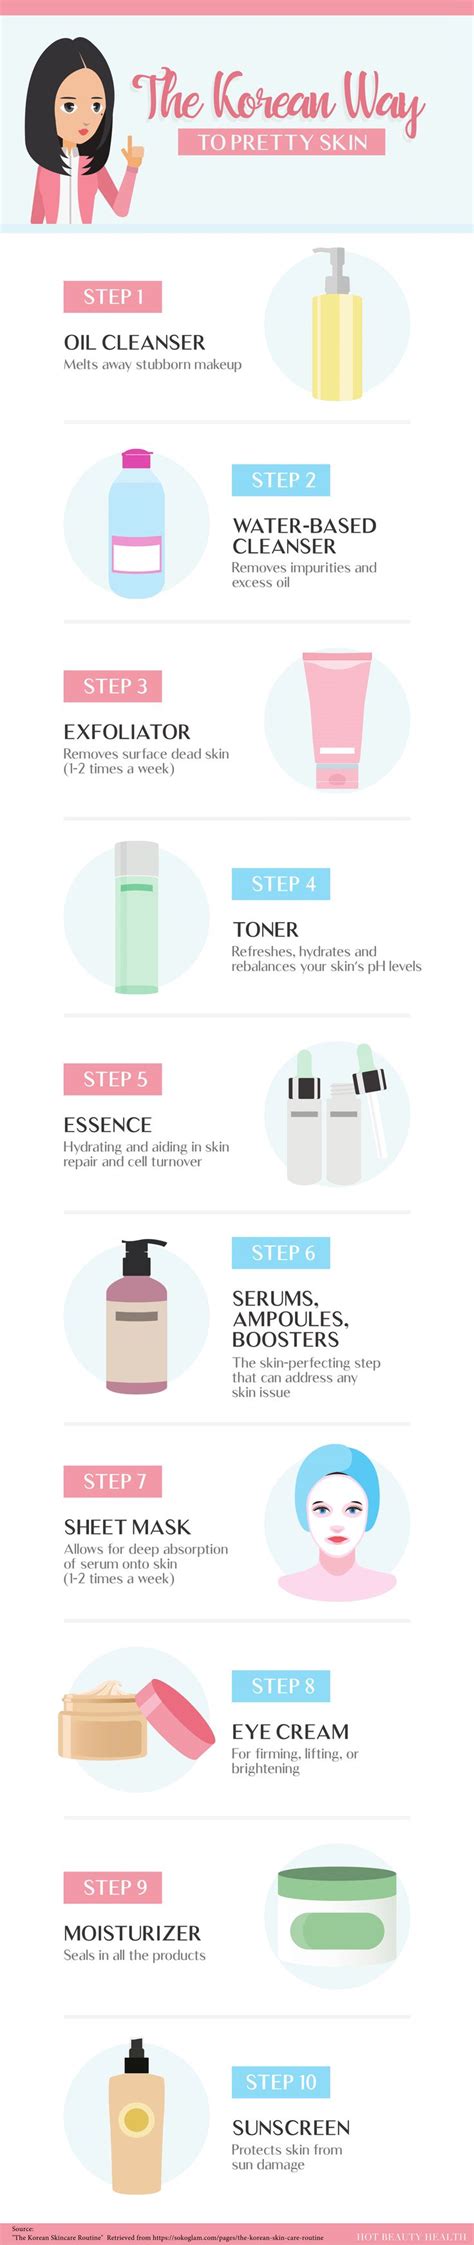 The Ever So Popular 10 Step Korean Skincare Routine Is Easier Than Ever